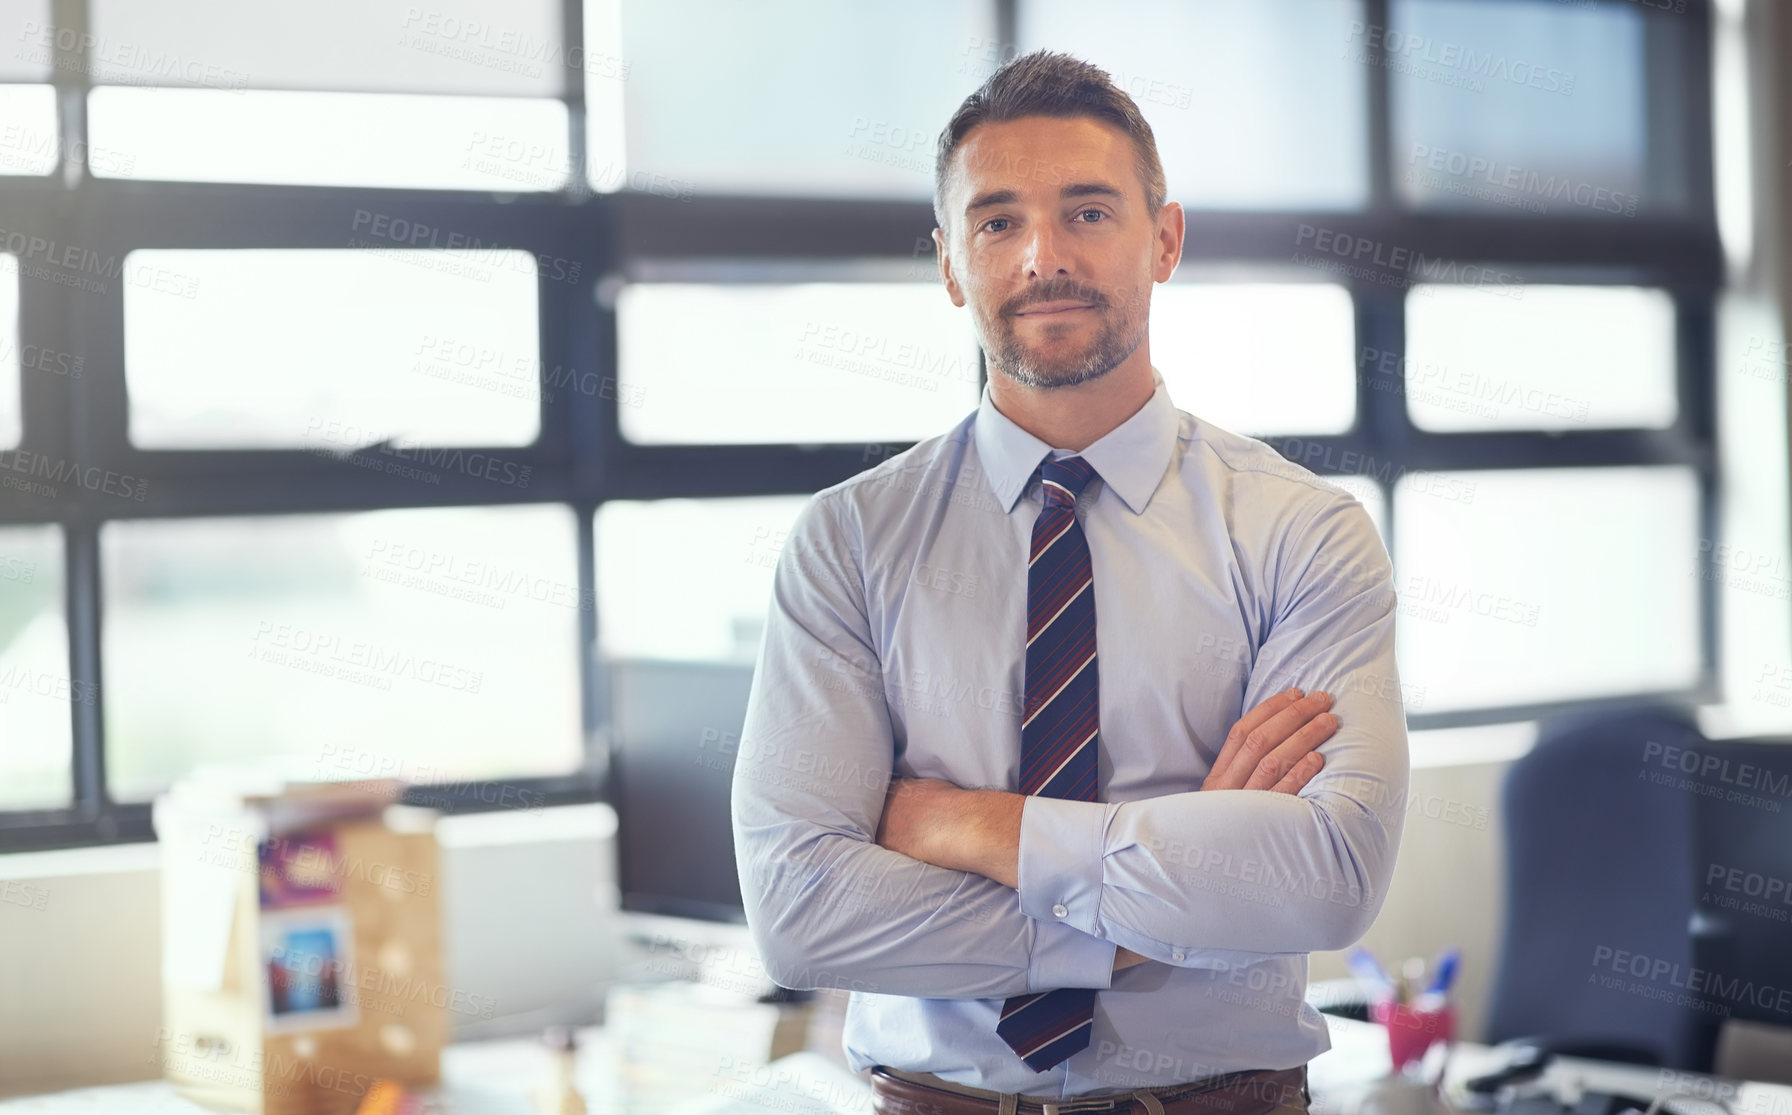 Buy stock photo Portrait of a businessman standing confidently in his office